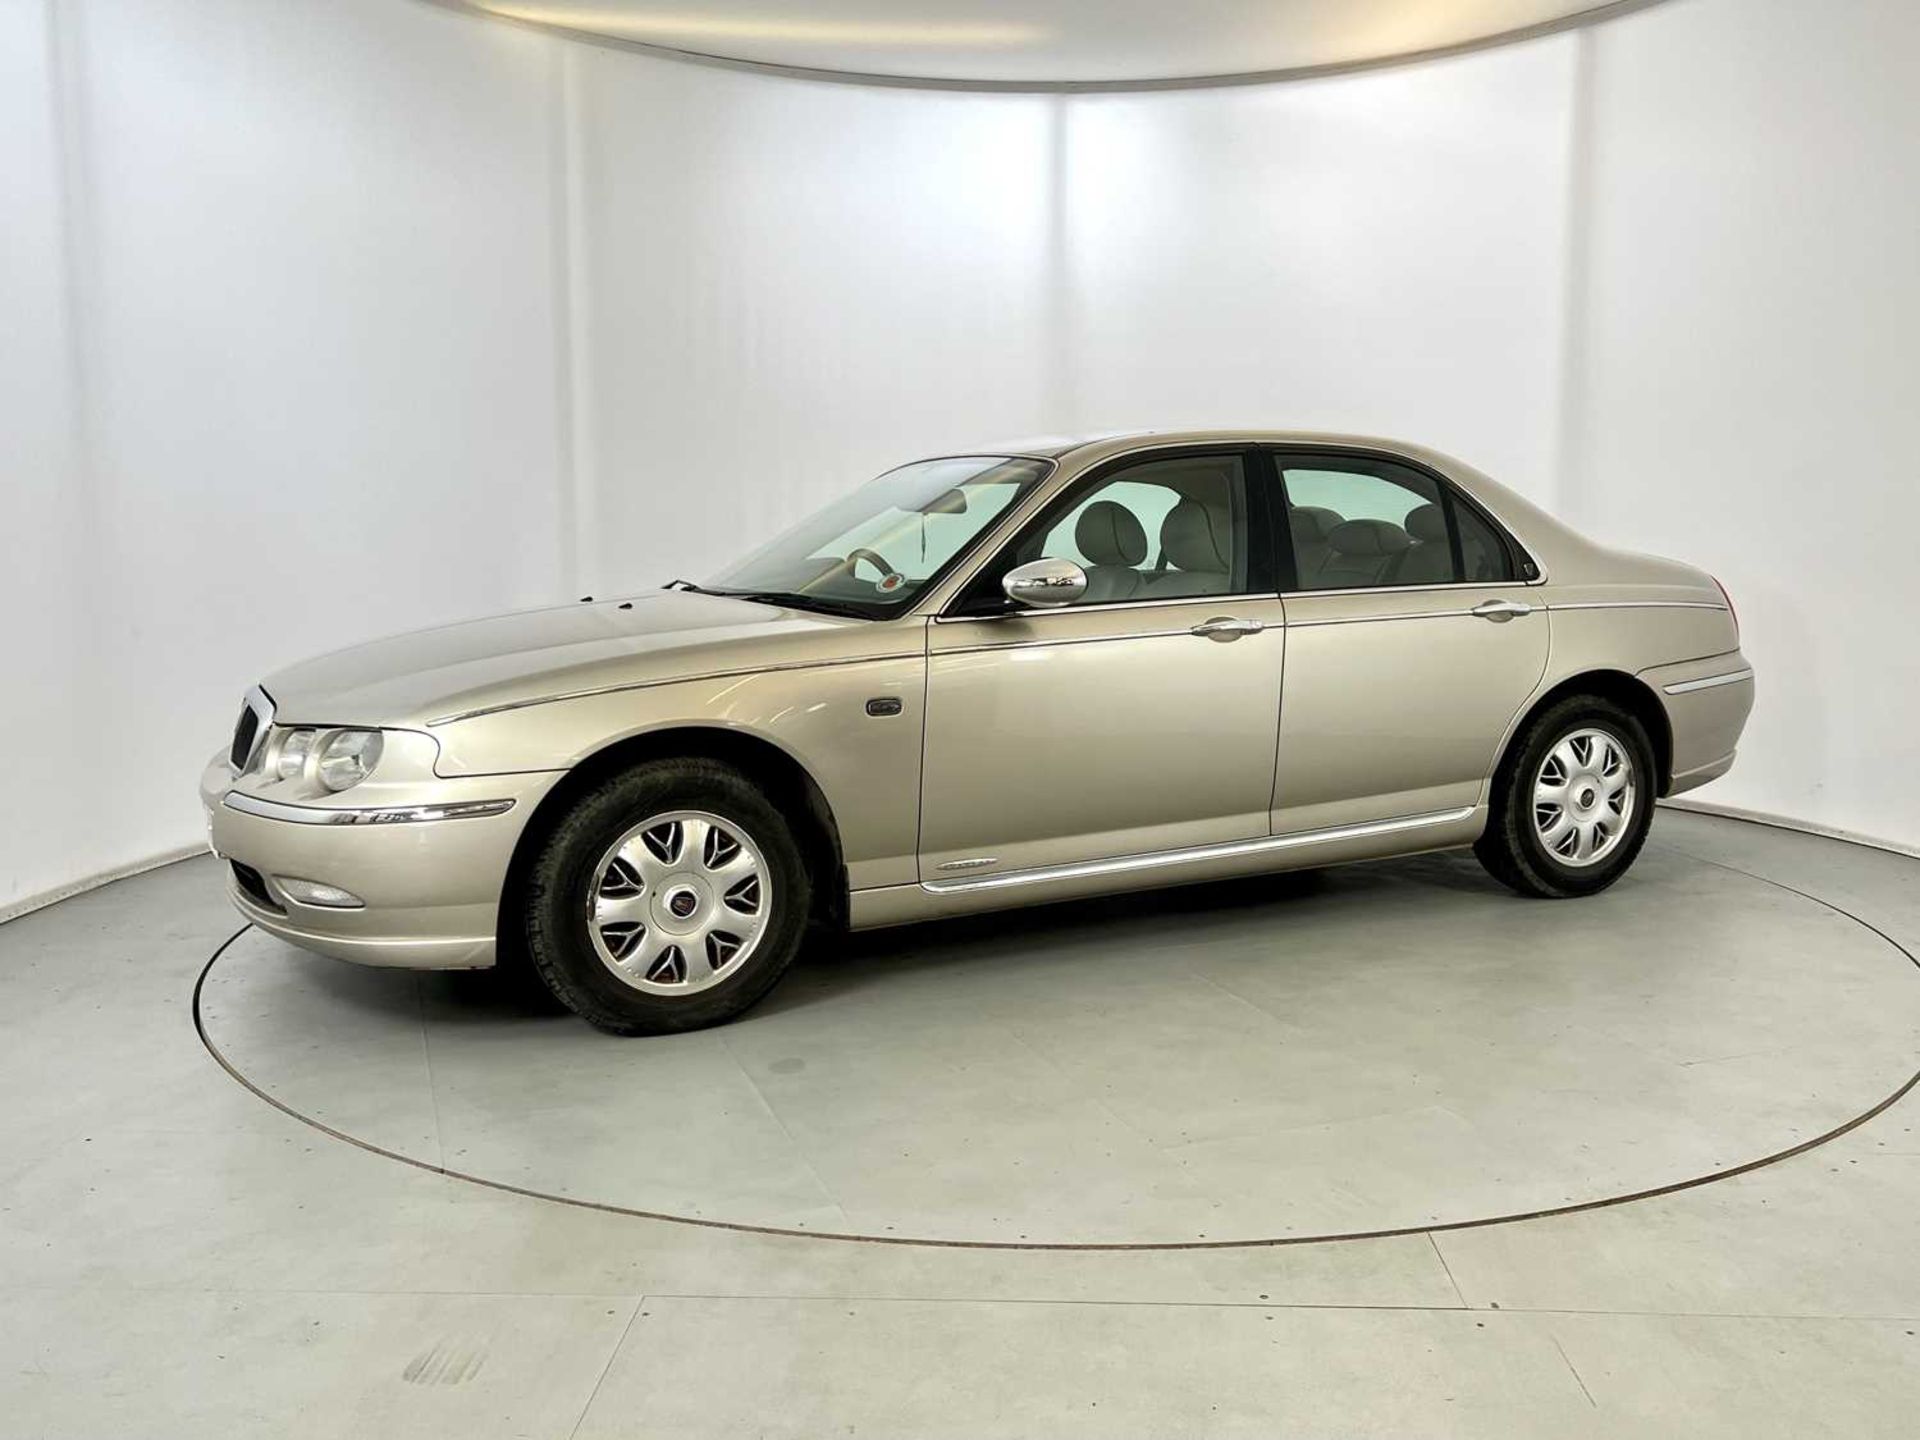 2000 Rover 75 Connoisseur - Image 4 of 34